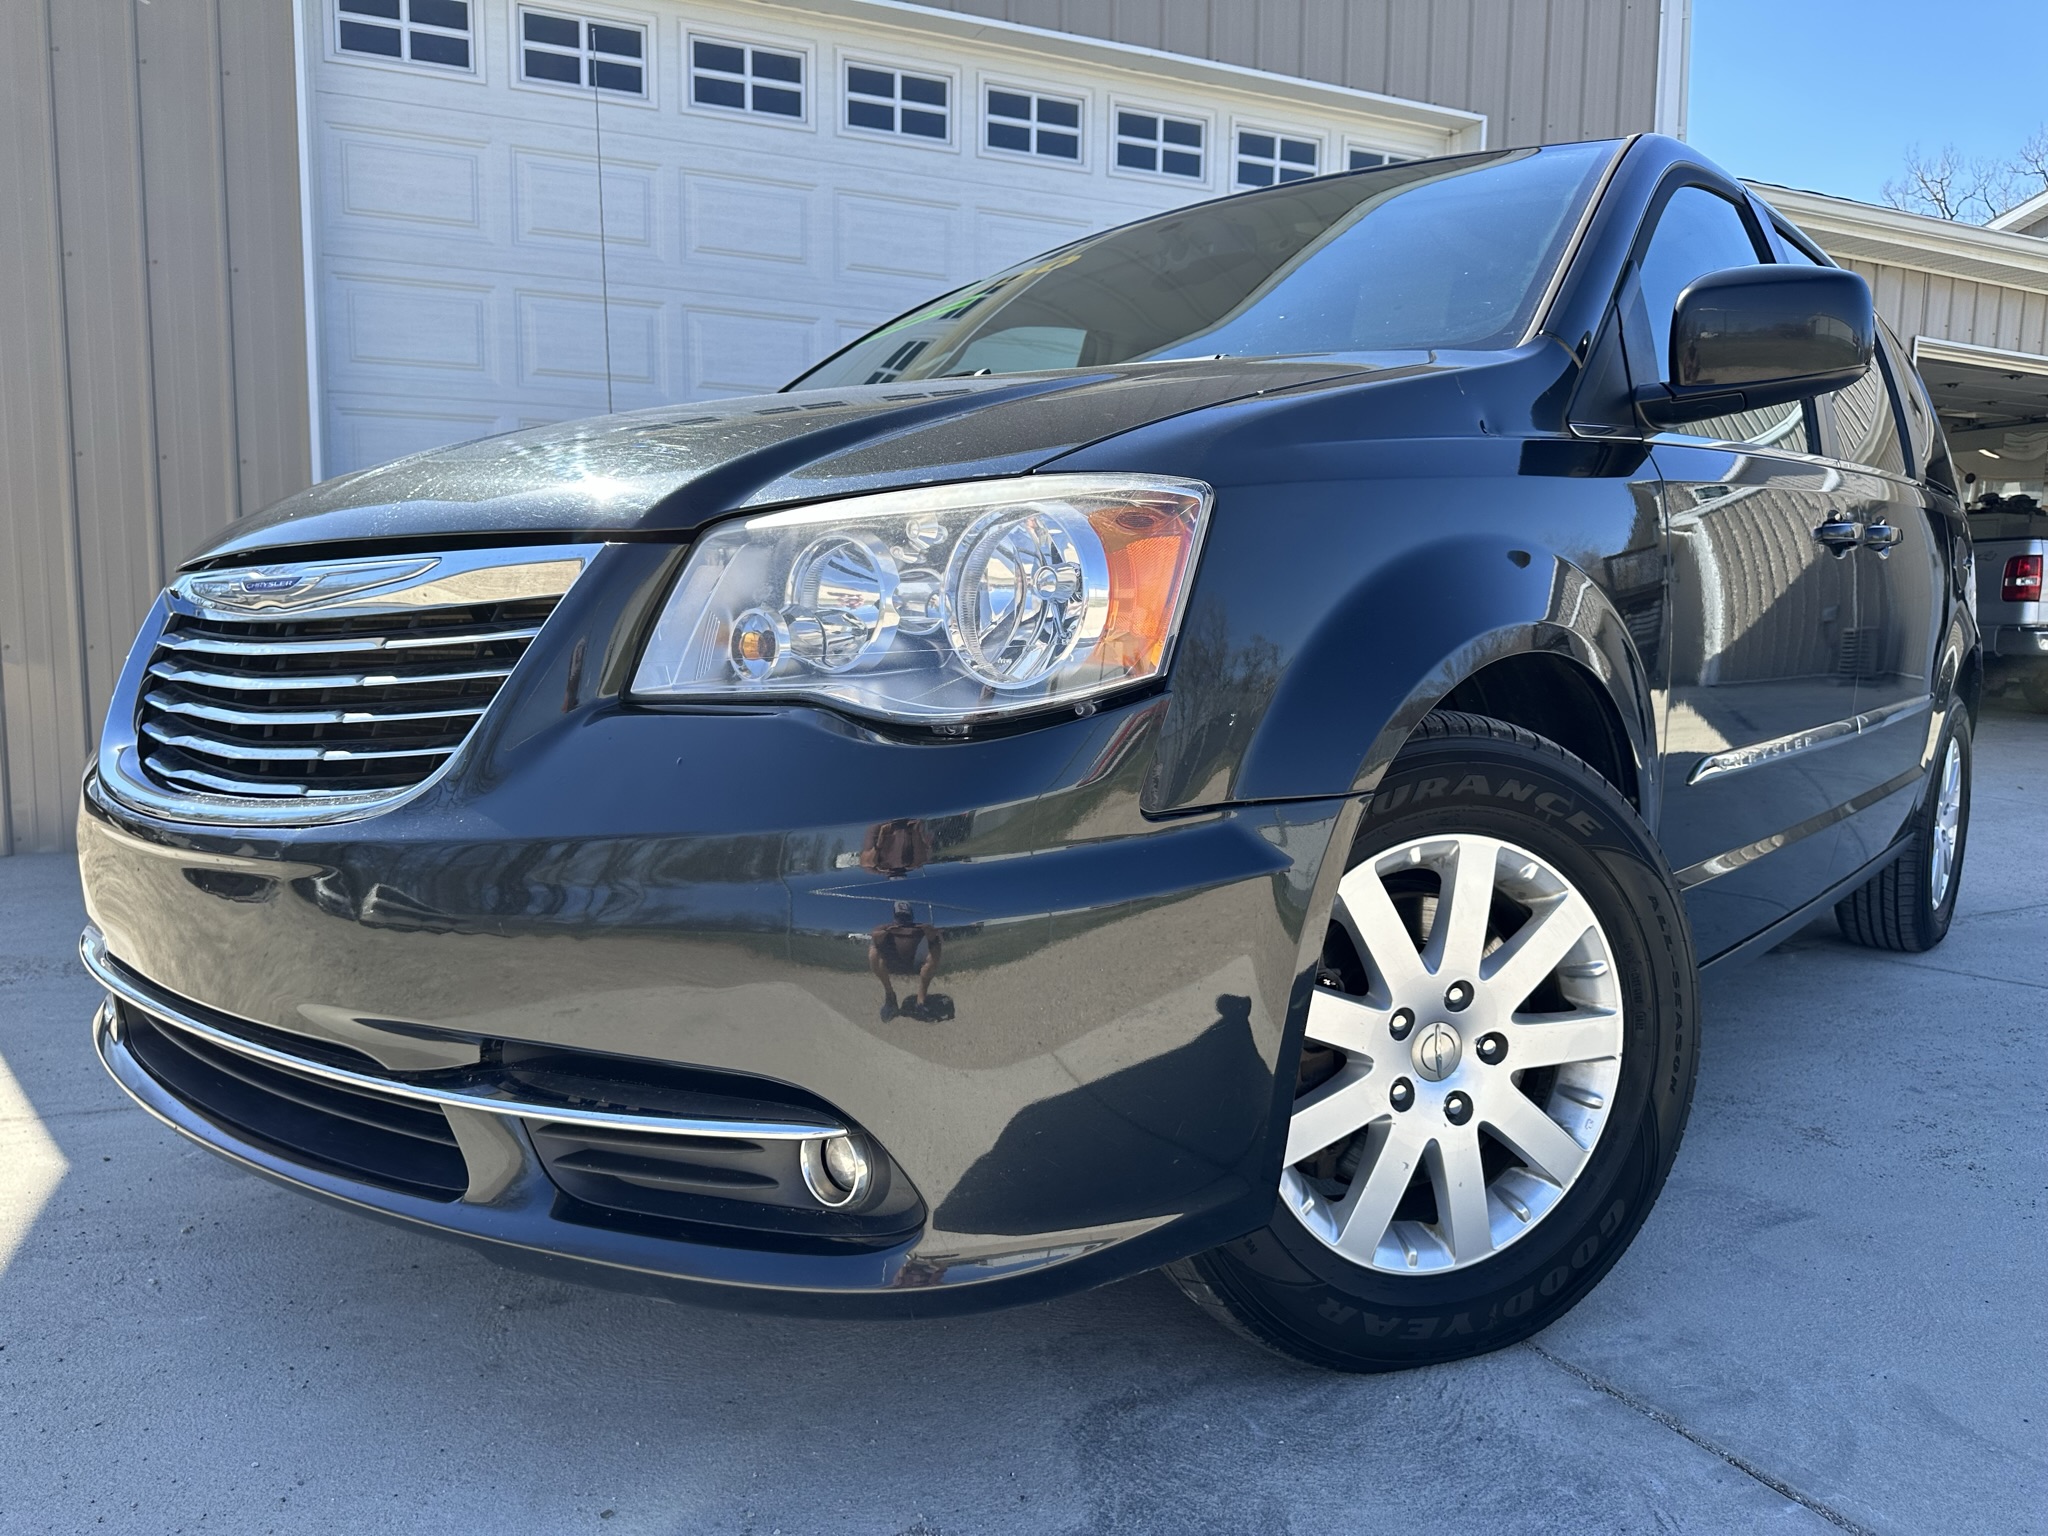 2014 Chrysler Town & Country For Sale Touring Loaded